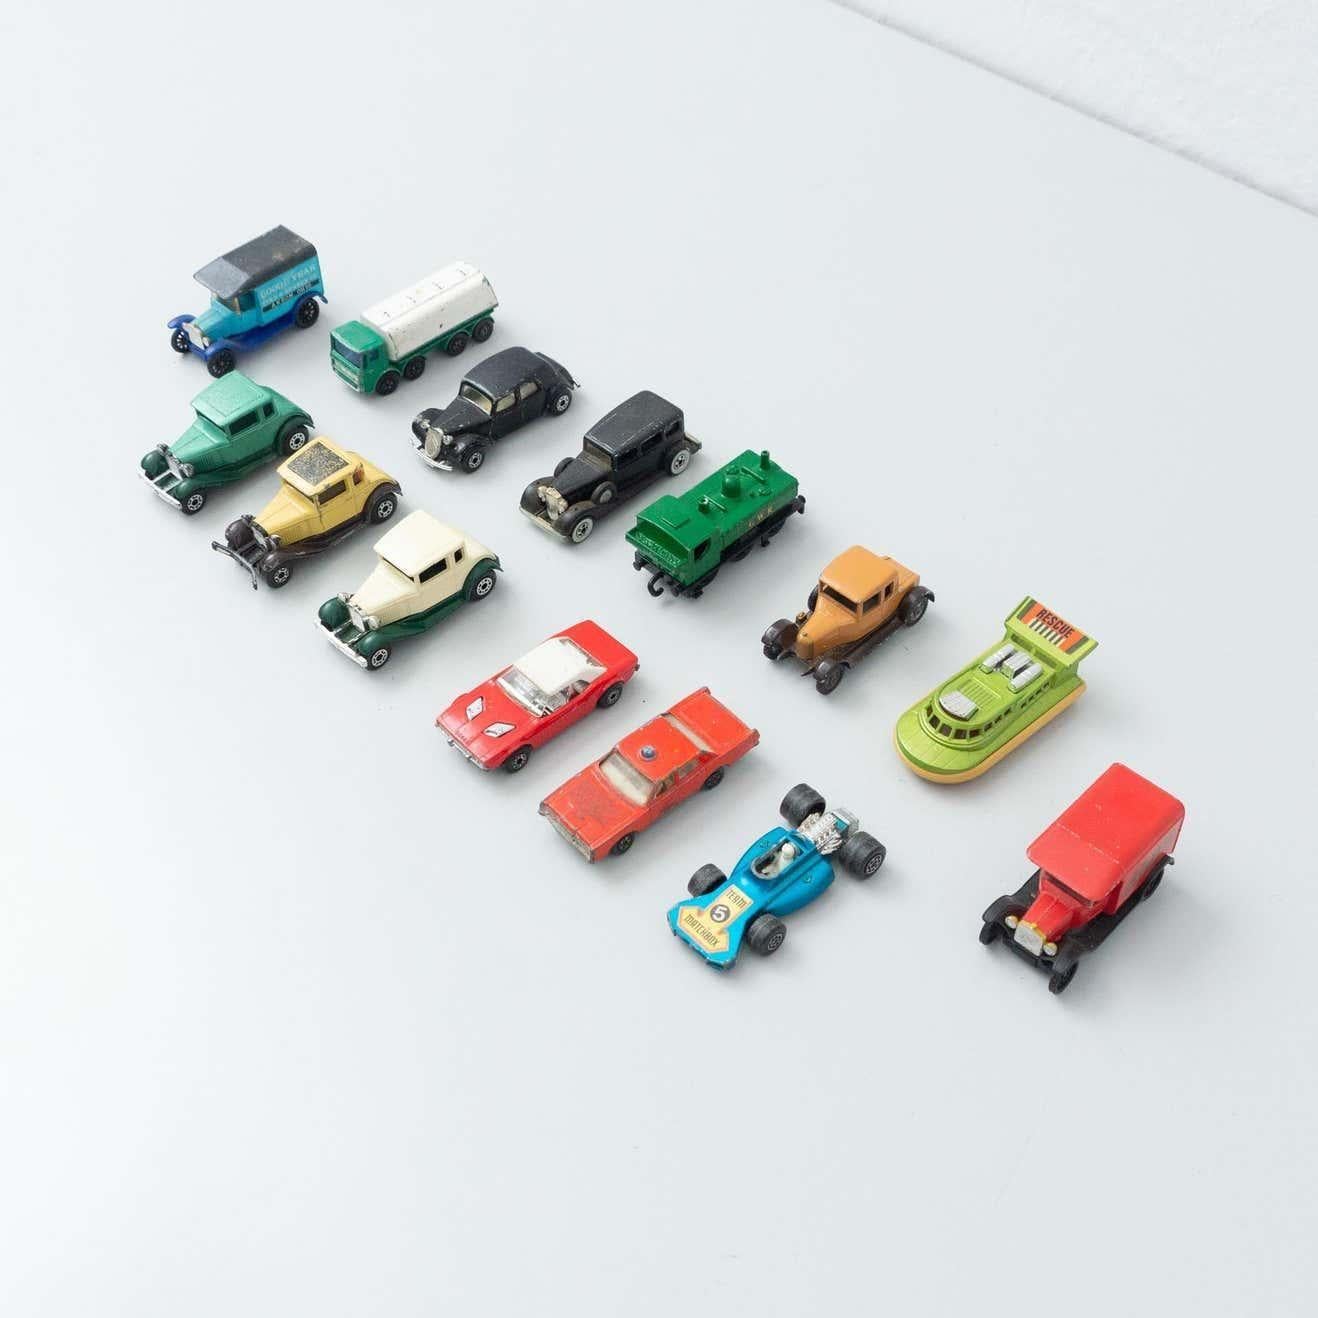 Set of fourteen vintage matchbox toy cars.
By Unknown manufacturer, circa 1960.

In original condition, with minor wear consistent with age and use, preserving a beautiful patina.

Materials:
Metal
Plastic

Dimensions (each one):
D 7.5 cm x W 2.5 cm